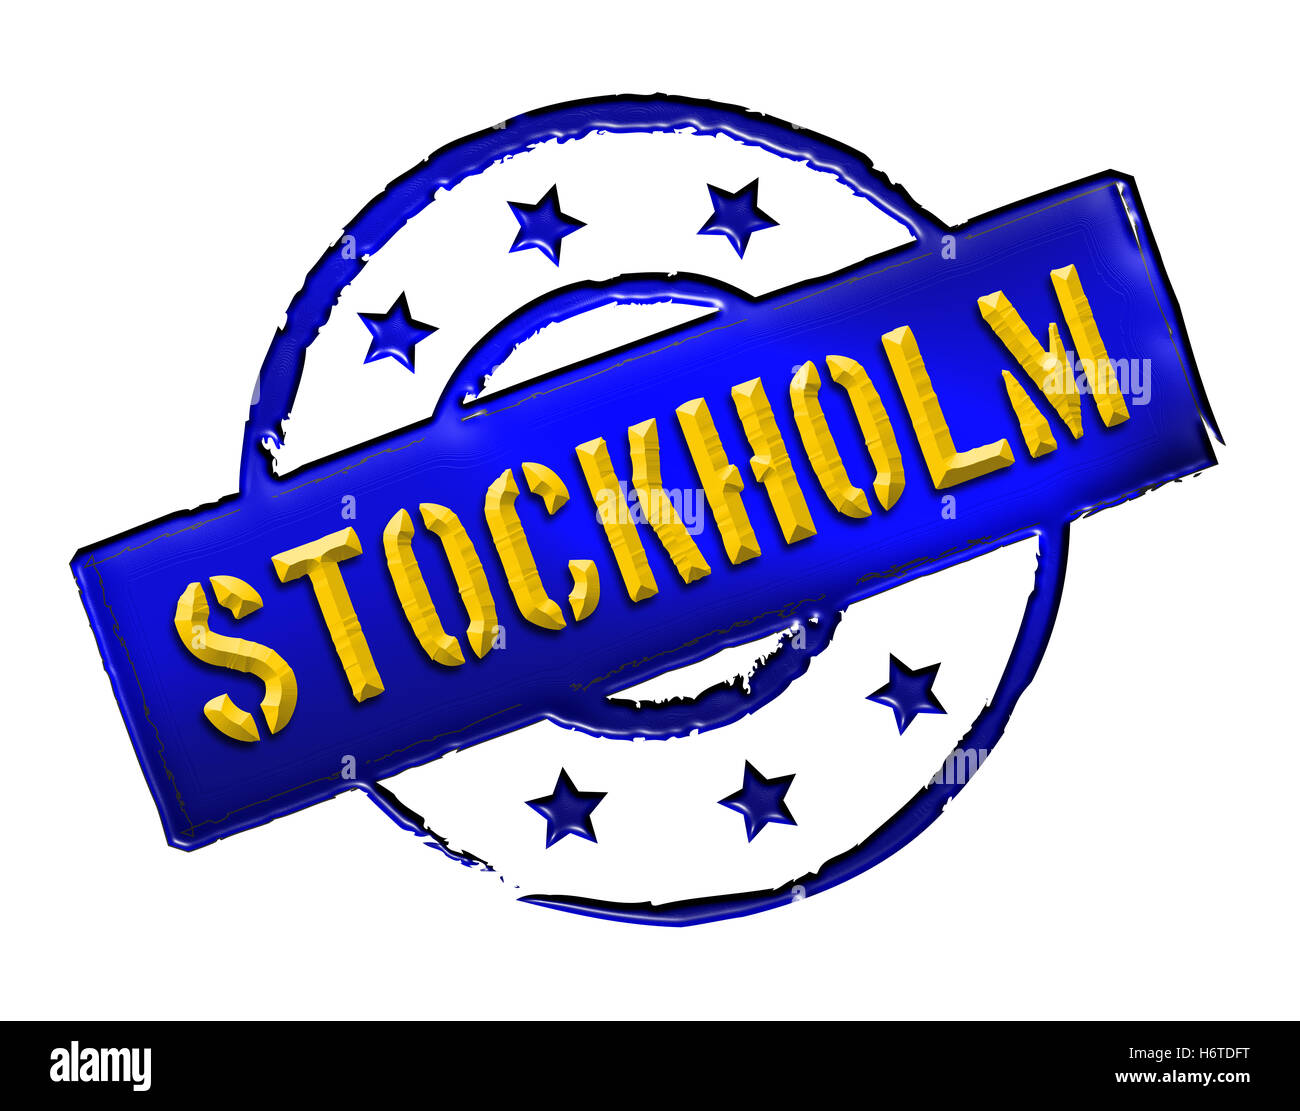 sweden stockholm stockhom capital suede isolated sweden caution important abstract stockholm stockhom retro label sign emperor Stock Photo